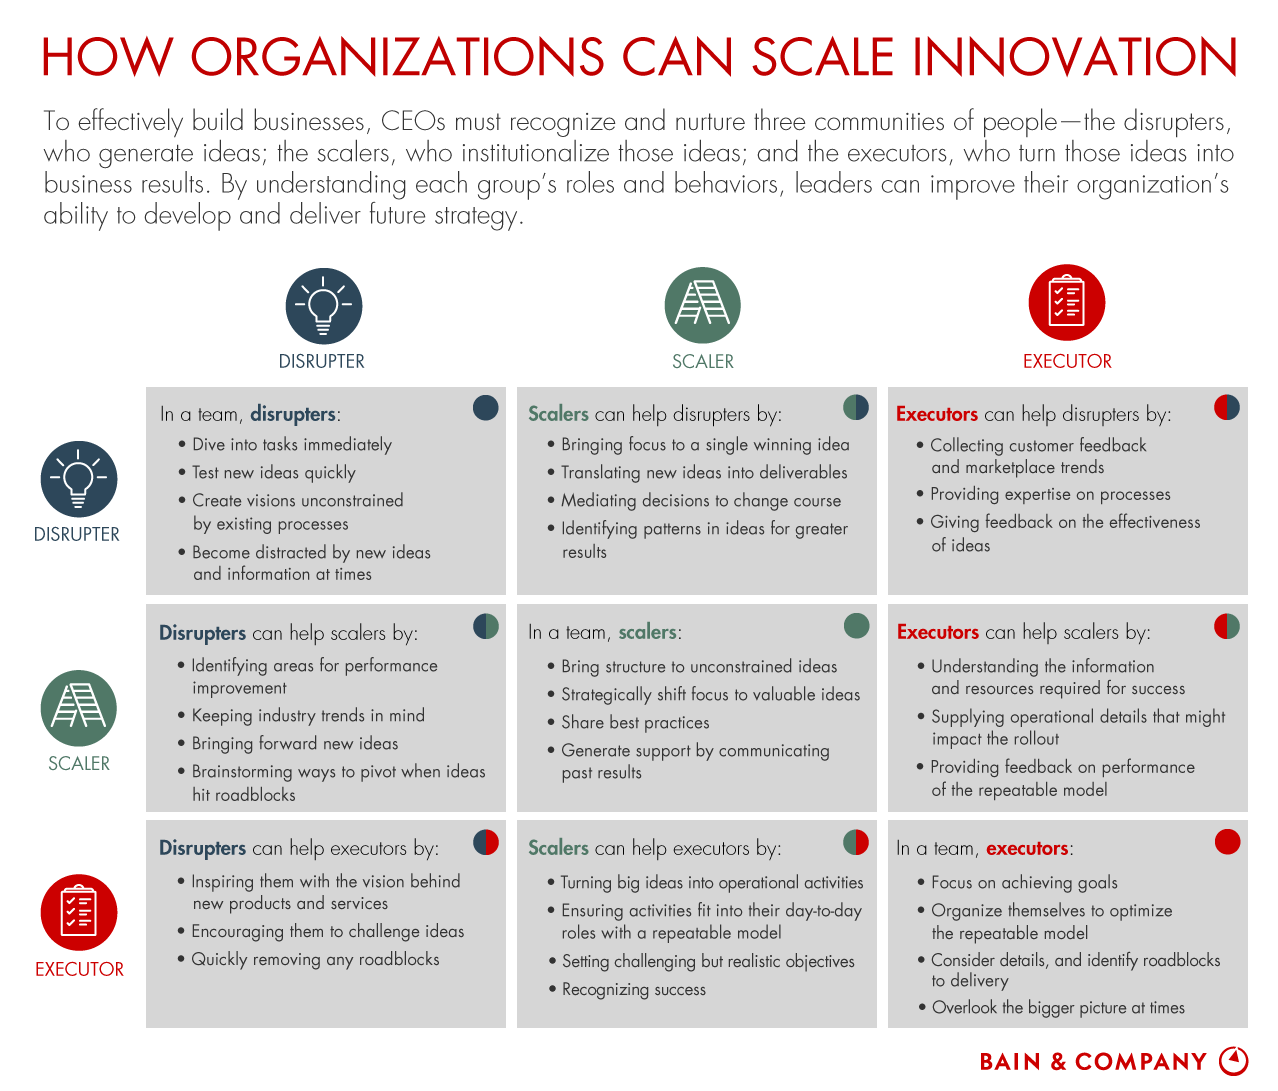 How organizations can scale innovation